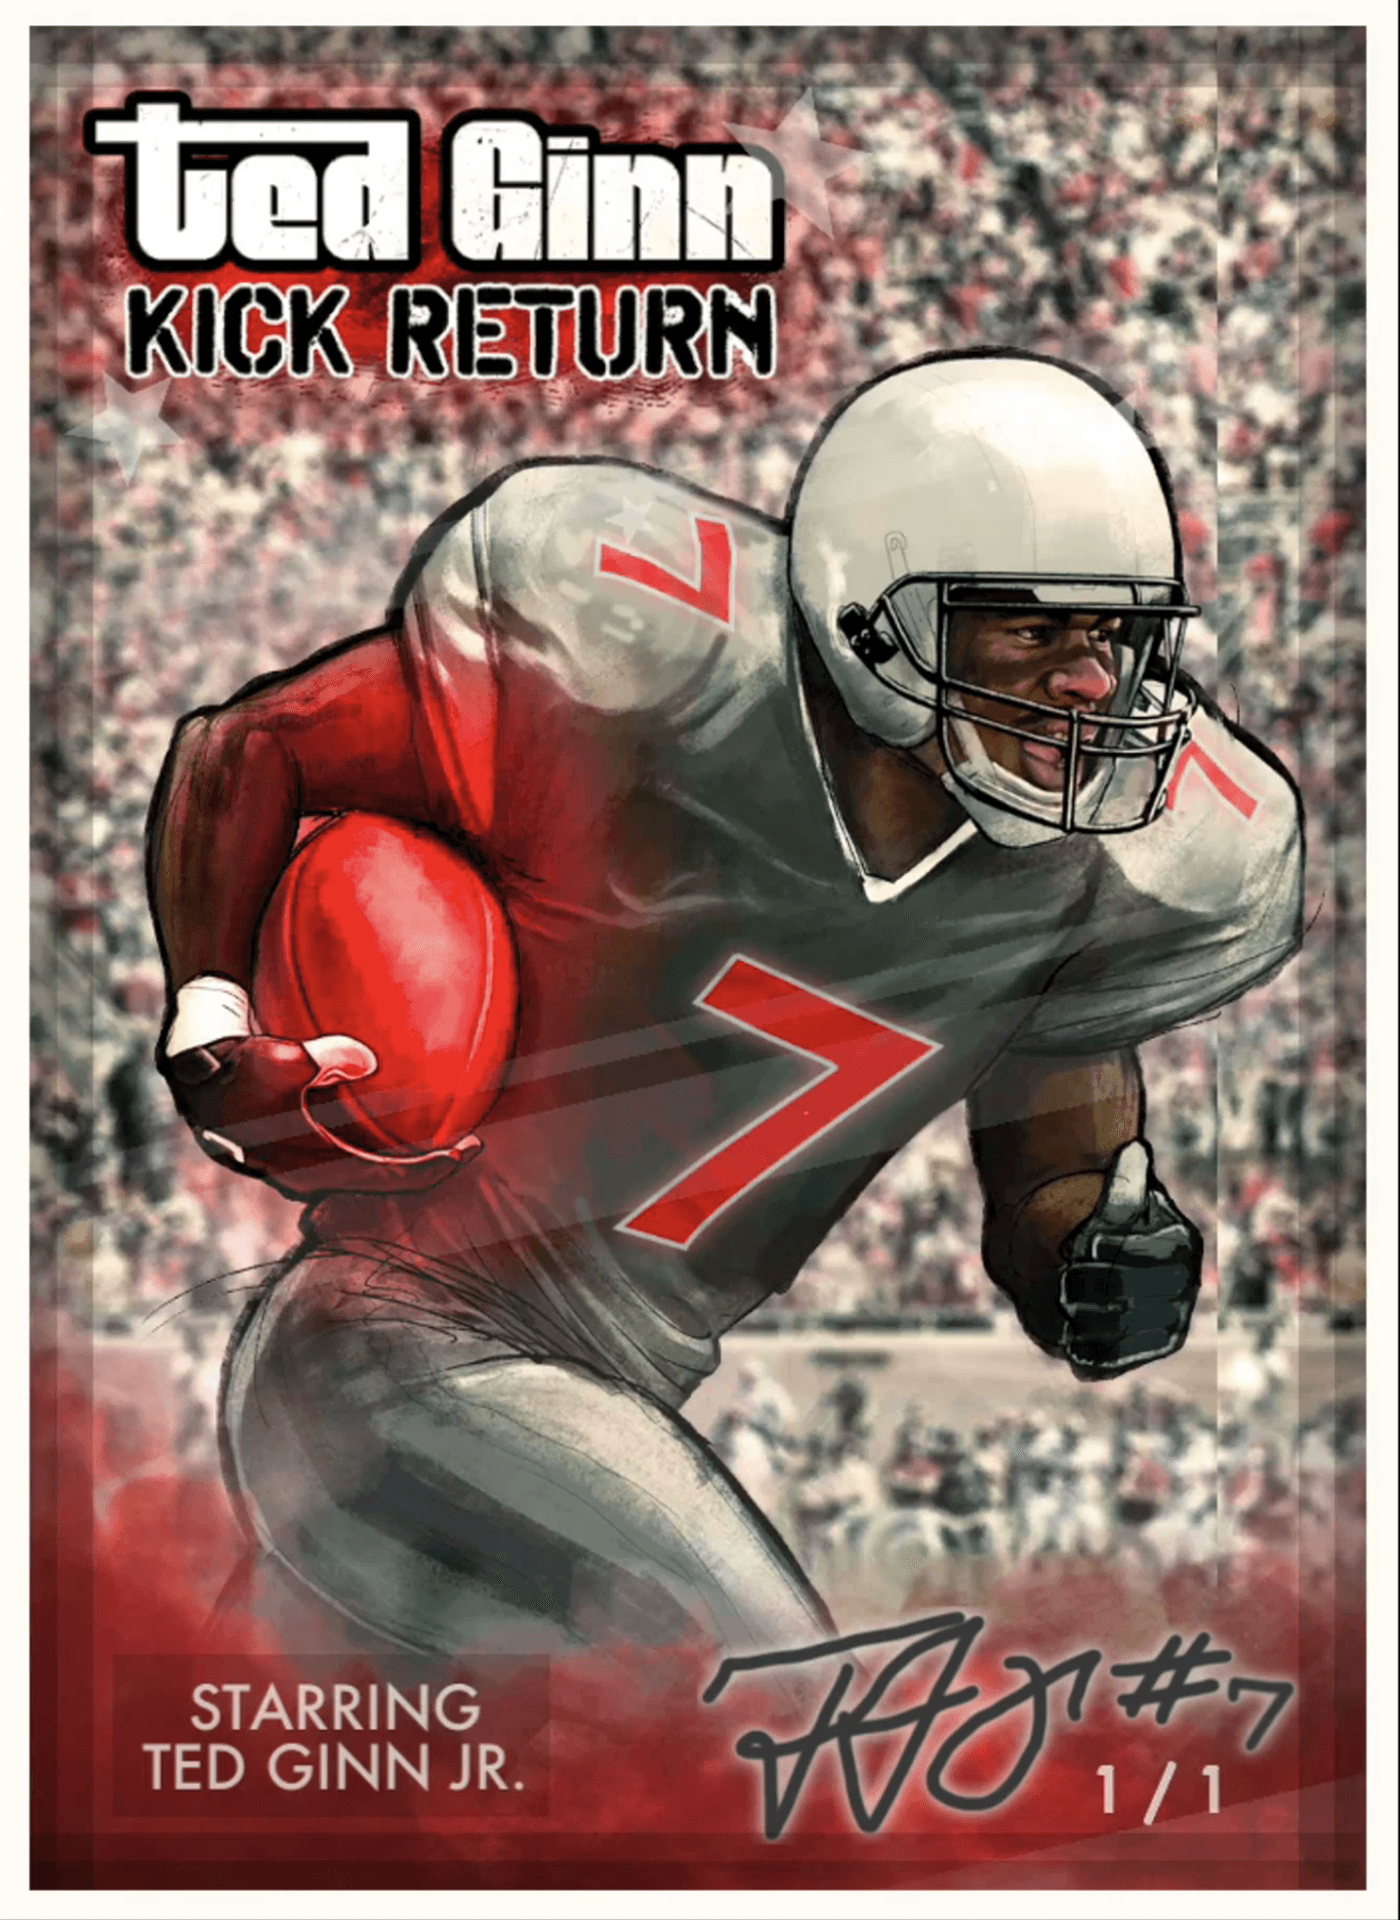 Ted Ginn: Kick Return - College Career (1 of 1 Special Edition)